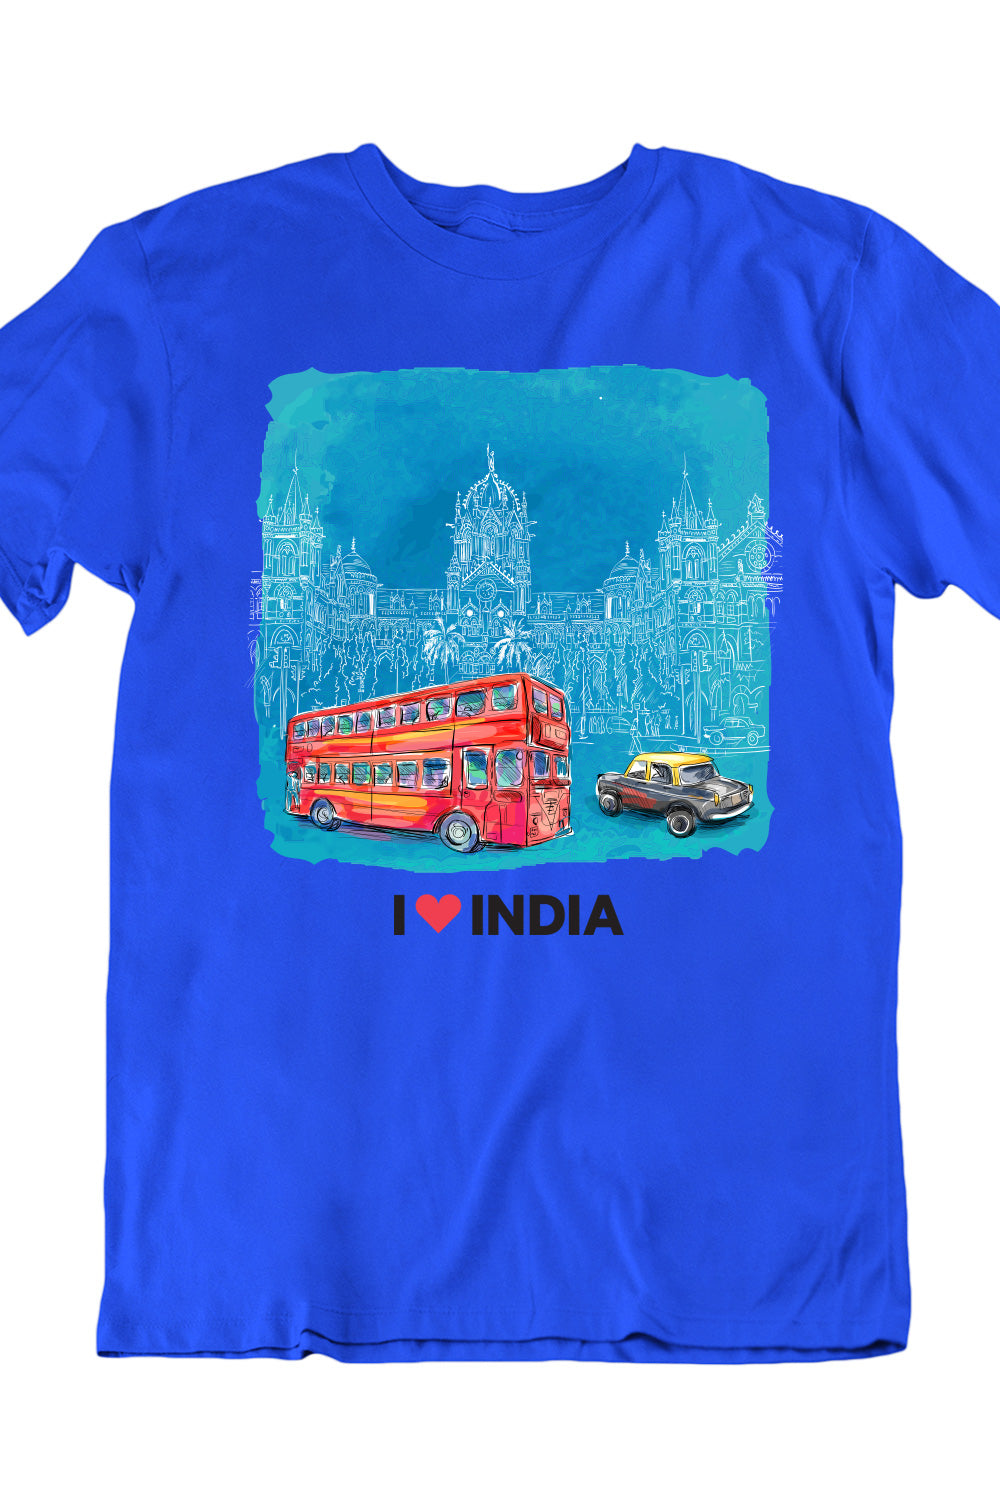 Mumbai Double Decker Bus - Styched in India Graphic T-Shirt White Color